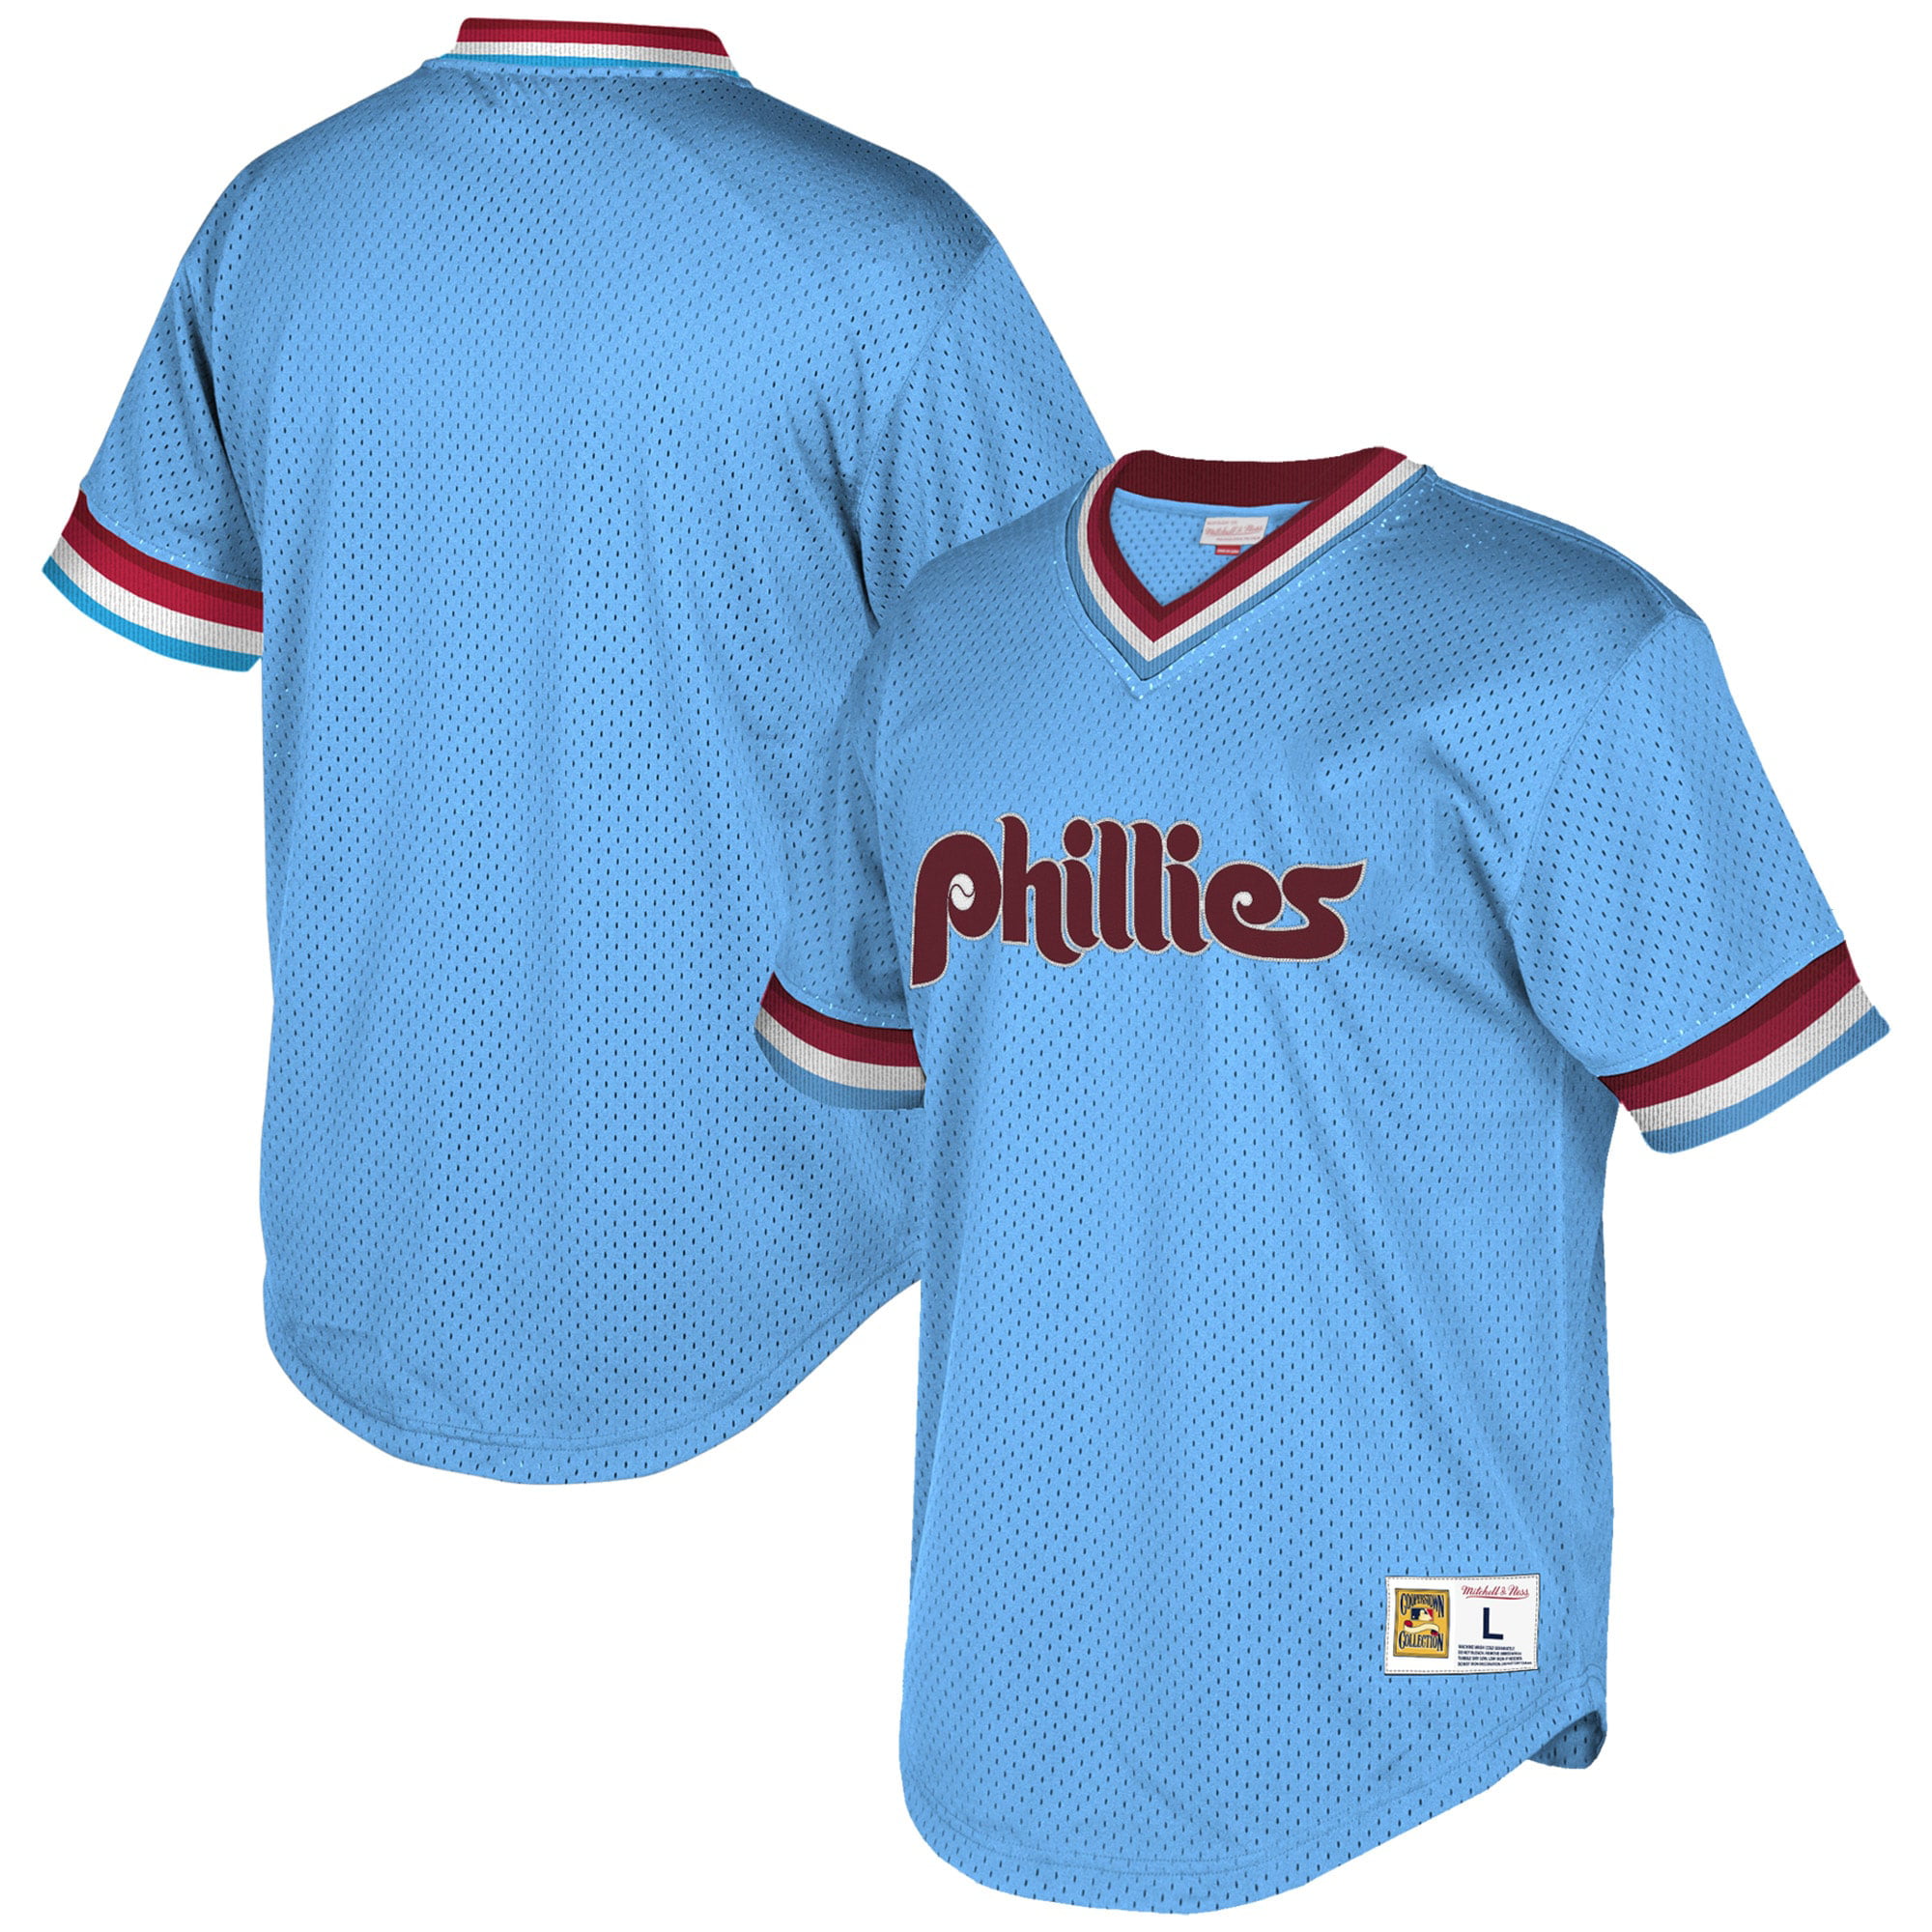 phillies jerseys for sale